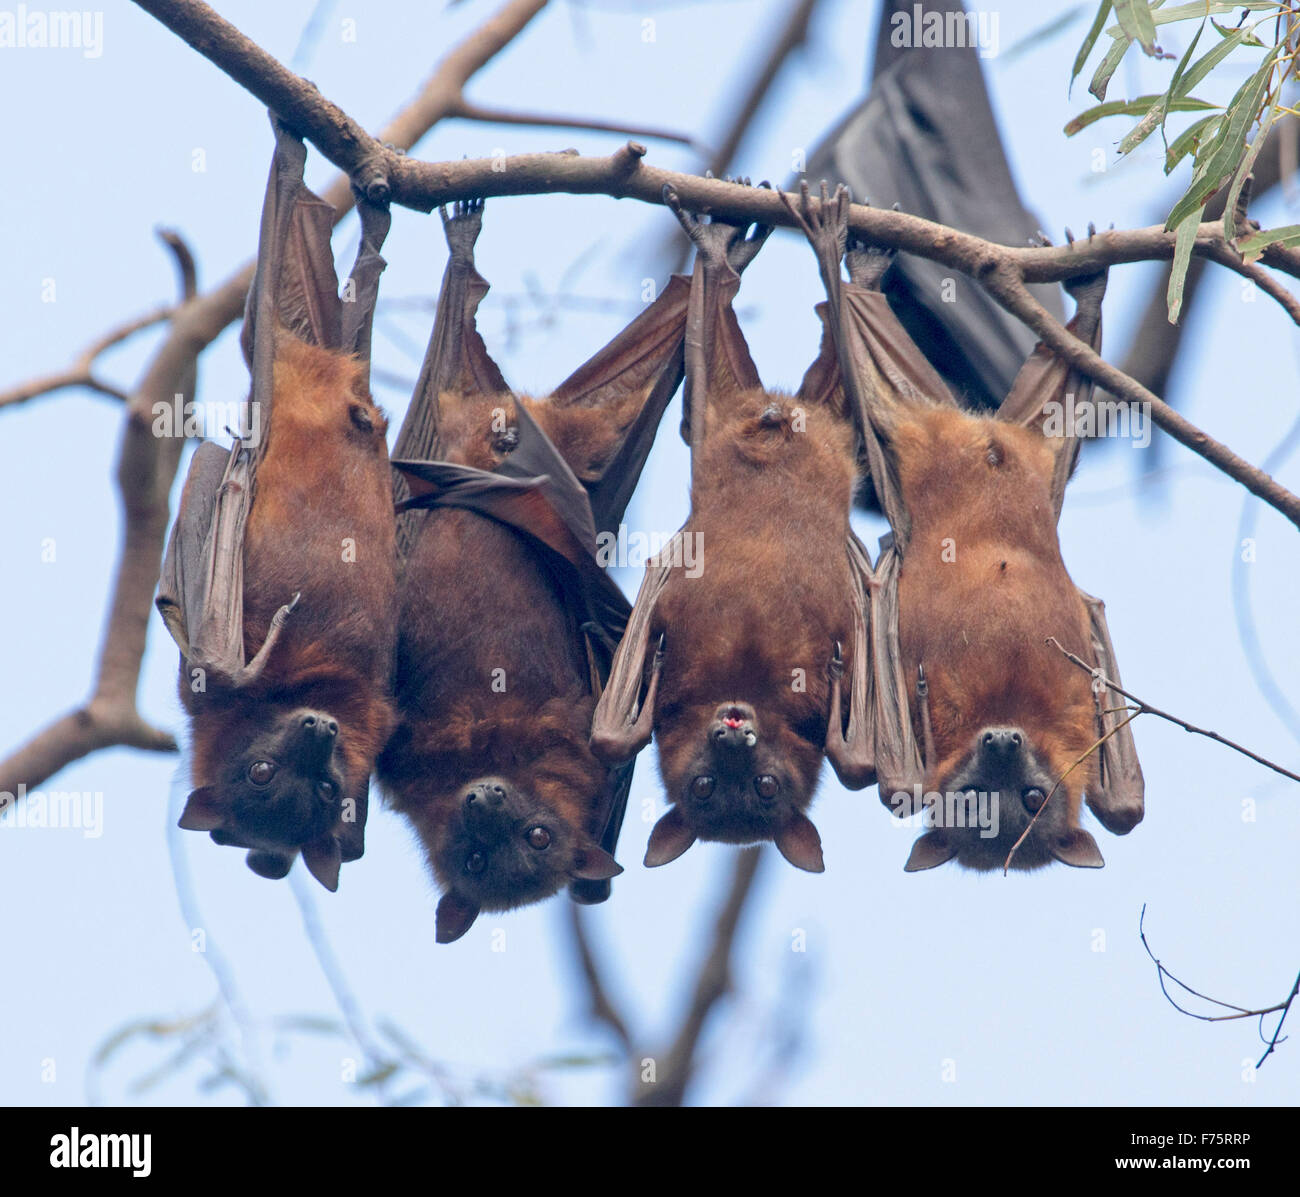 Group of grey-headed fruit bats / flying foxes, Pteropus poliocephalus, hanging in native trees against blue sky, in Australia Stock Photo